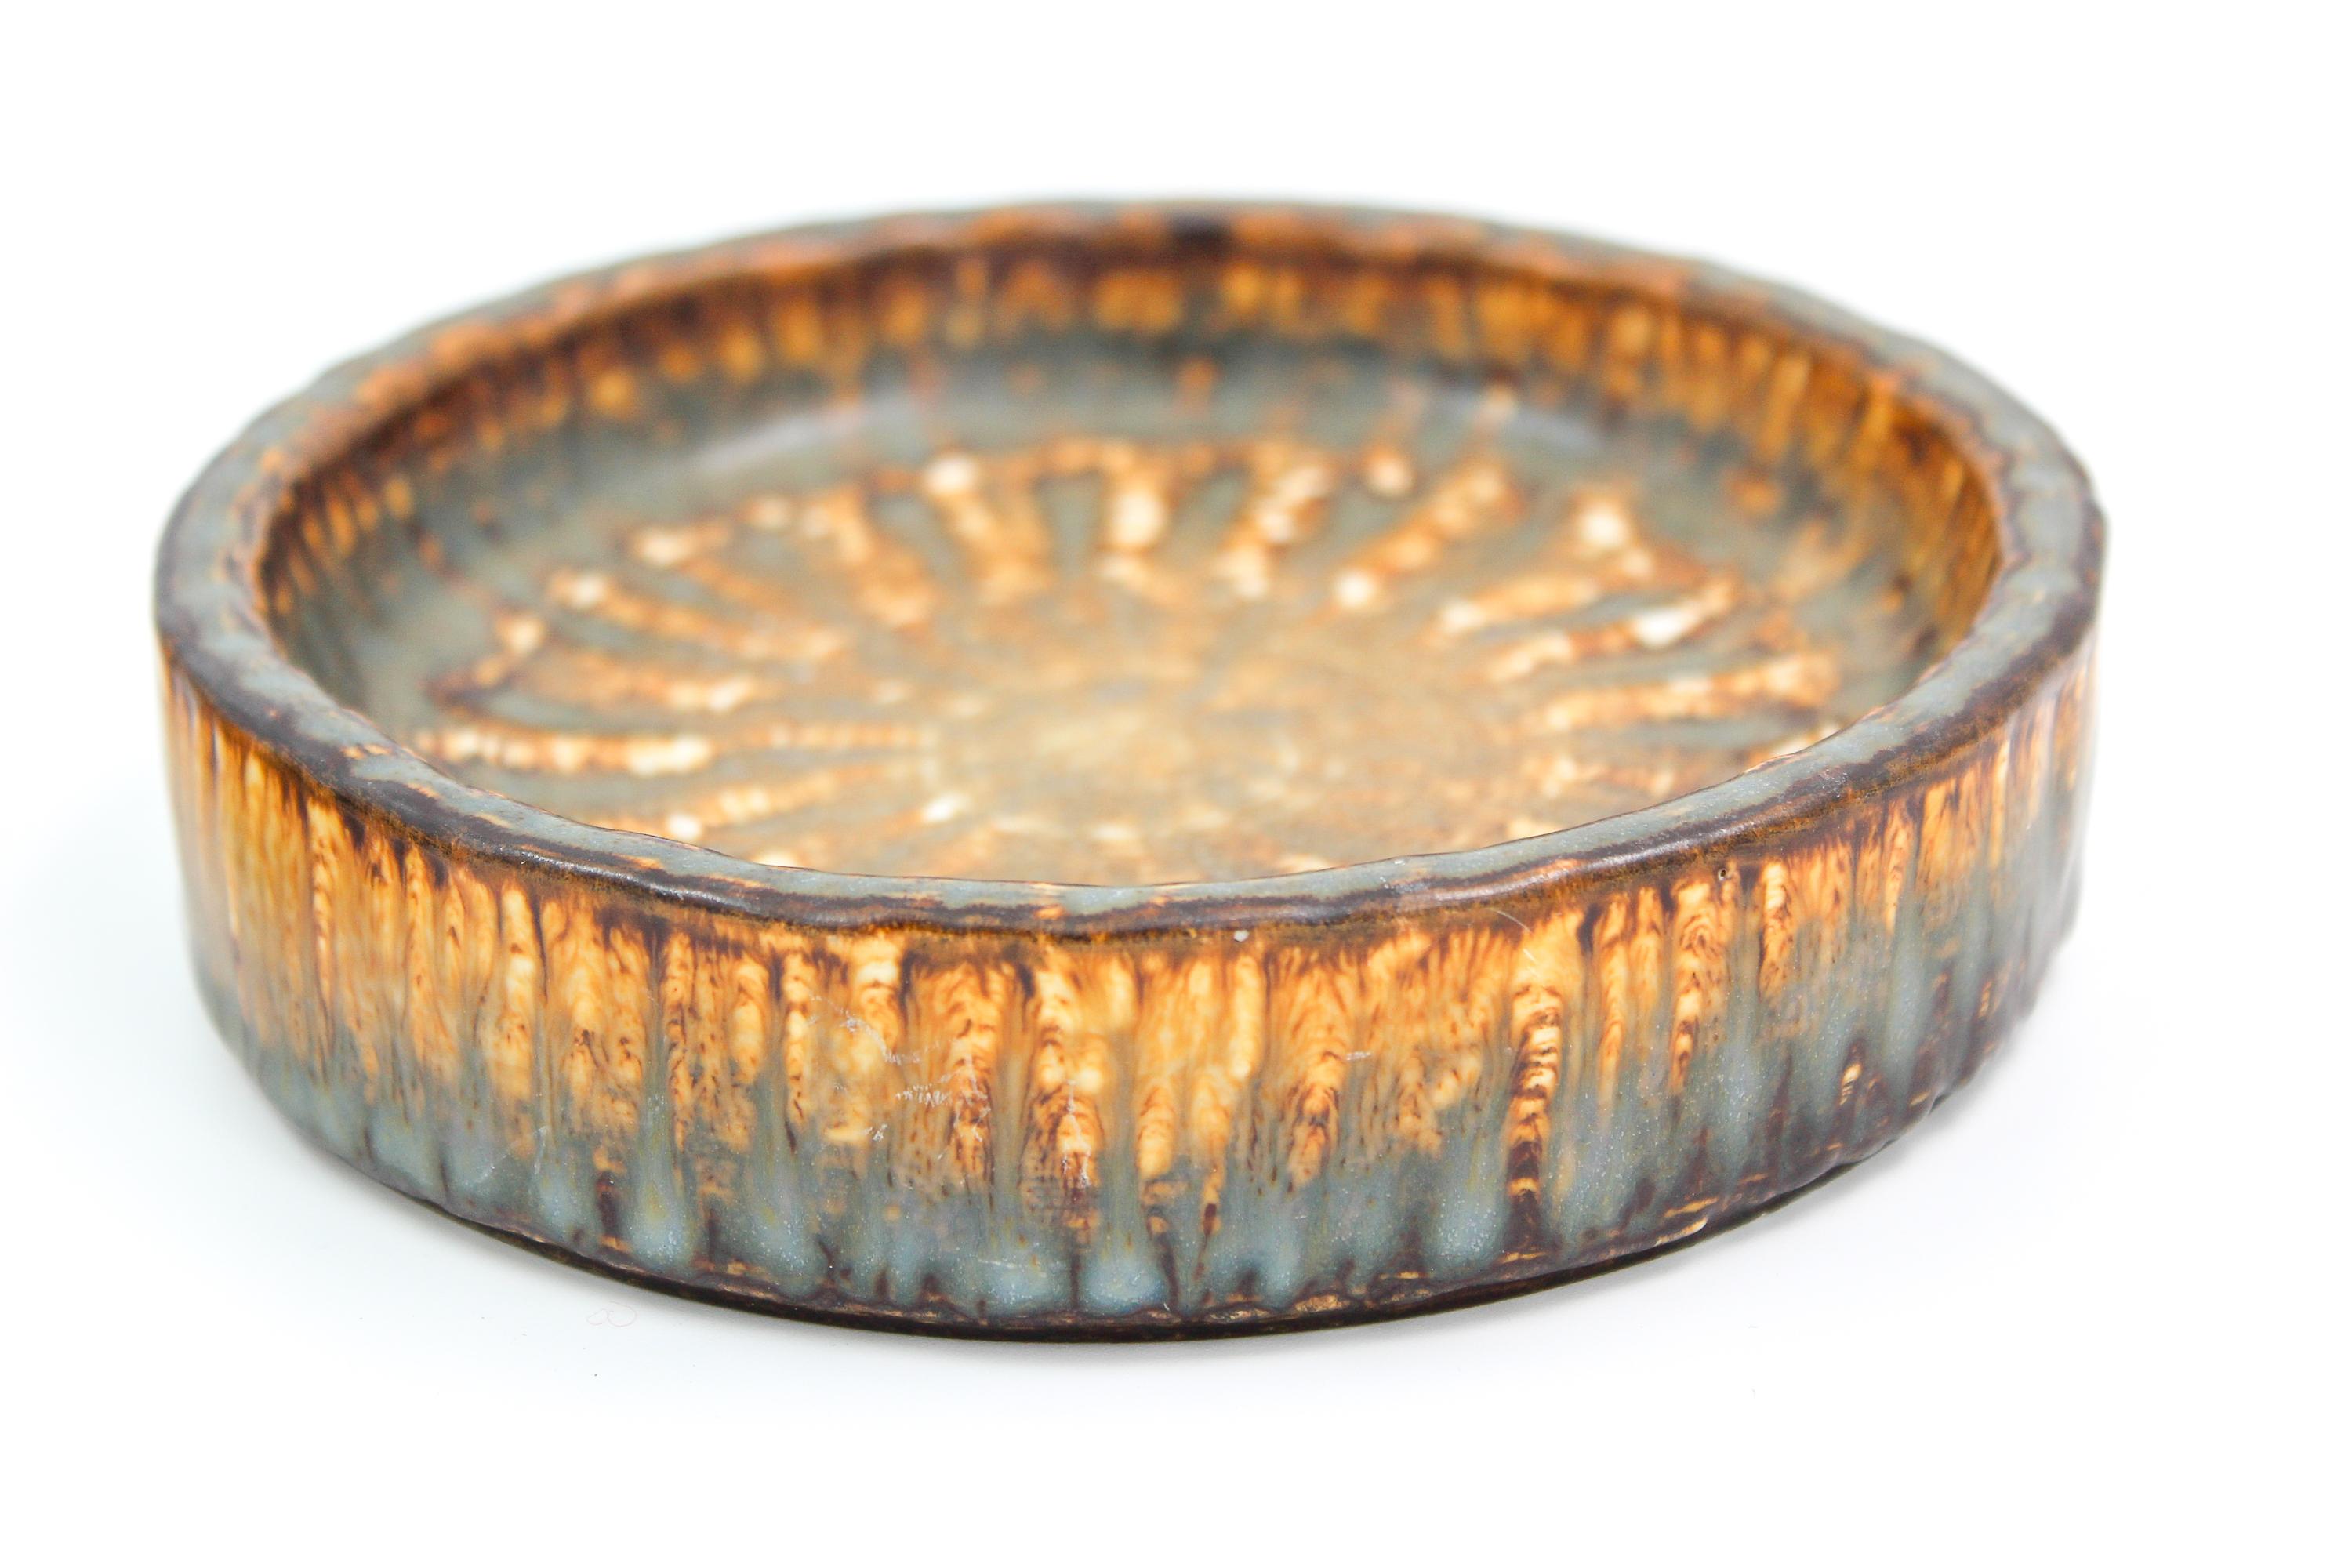 Swedish Pair of Midcentury Ceramic Bowls by Gunnar Nylund for Rörstrand, 1950s For Sale